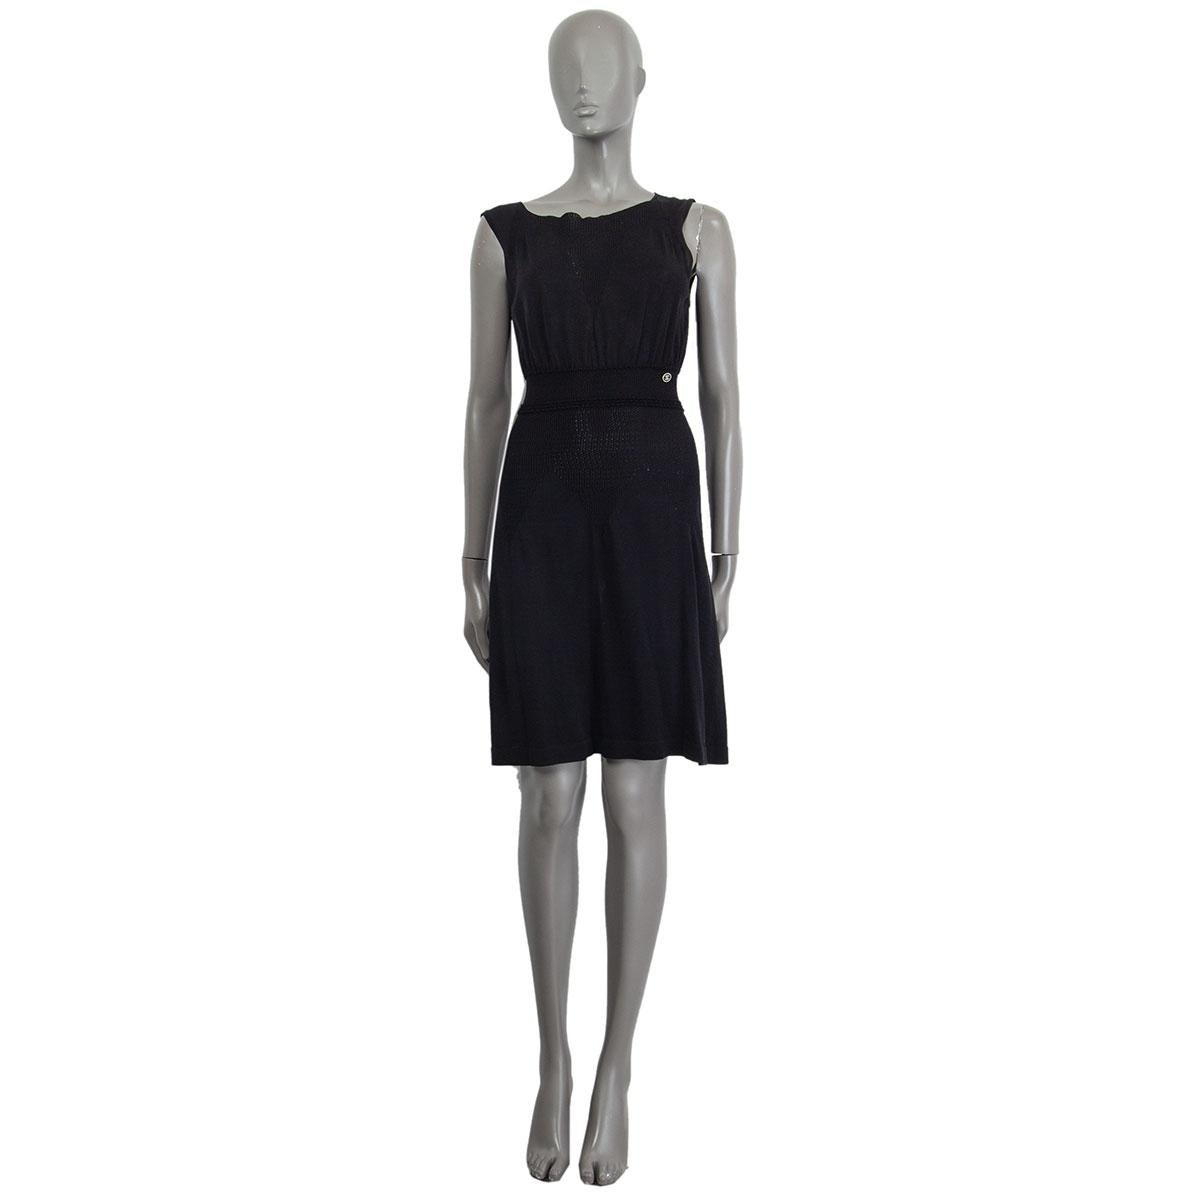 100% authentic Chanel sleeveless knit dress in black cotton (100%) with a wide neckline. Unlined. Has been worn and is in excellent condition.  

2011 Spring/Summer

Measurements
Tag Size	36
Size	XS
Shoulder Width	40cm (15.6in)
Bust	74cm (28.9in) to